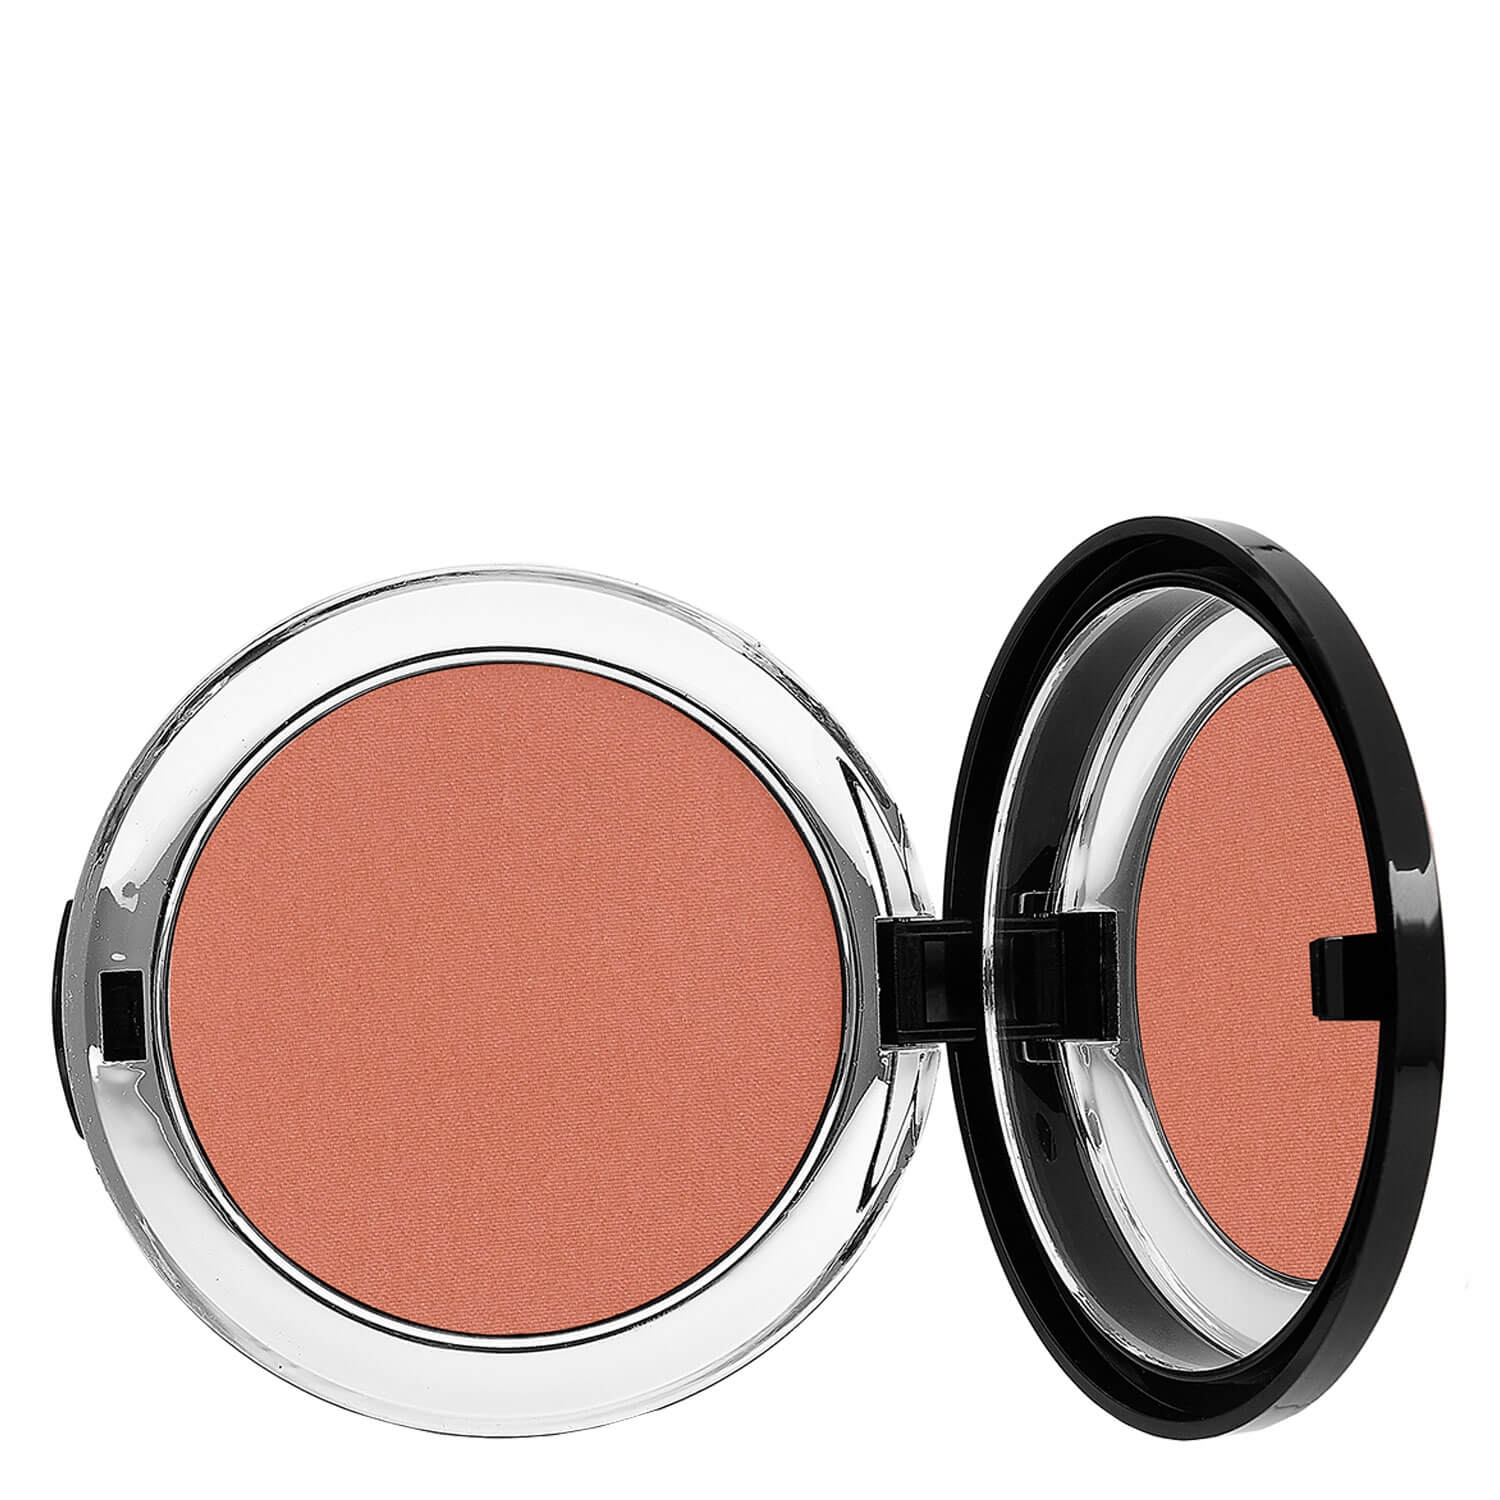 Product image from bellapierre Teint - Compact Mineral Blush Autumn Glow